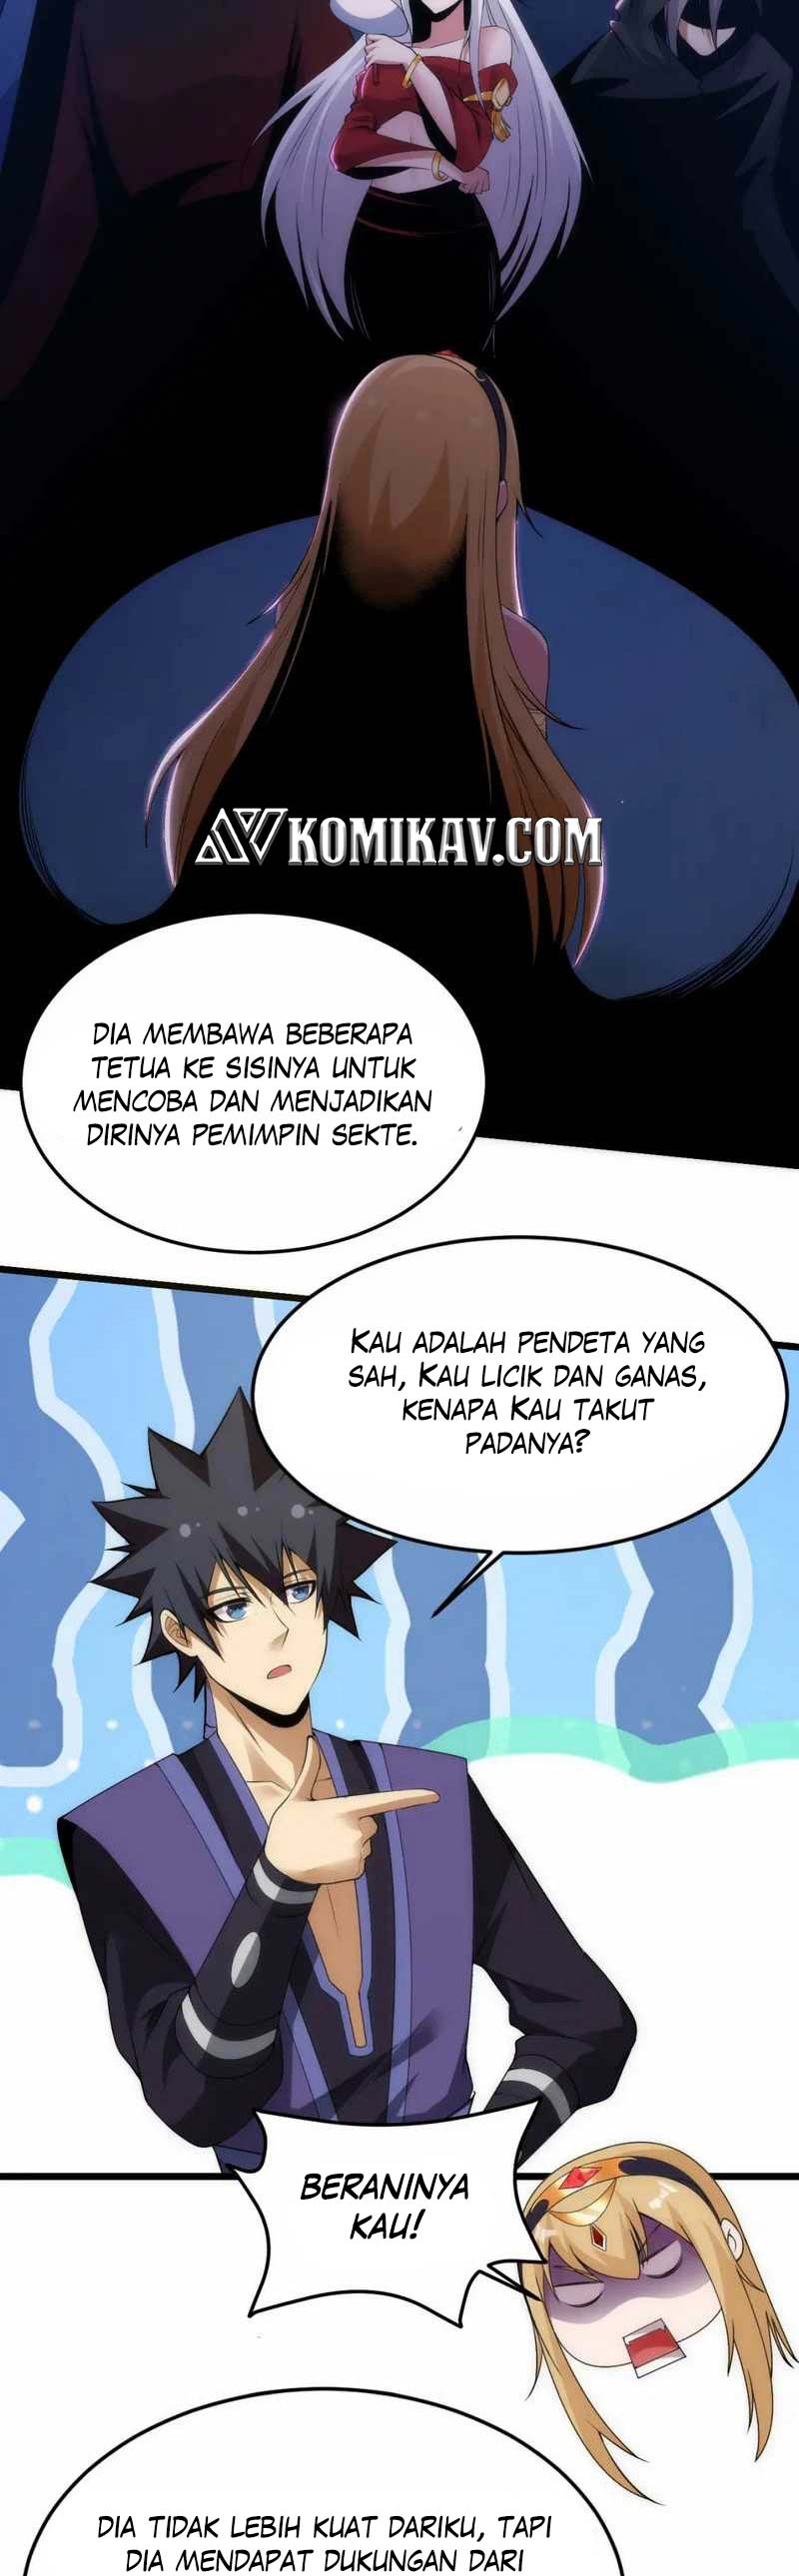 Dilarang COPAS - situs resmi www.mangacanblog.com - Komik i just want to be beaten to death by everyone 132 - chapter 132 133 Indonesia i just want to be beaten to death by everyone 132 - chapter 132 Terbaru 9|Baca Manga Komik Indonesia|Mangacan